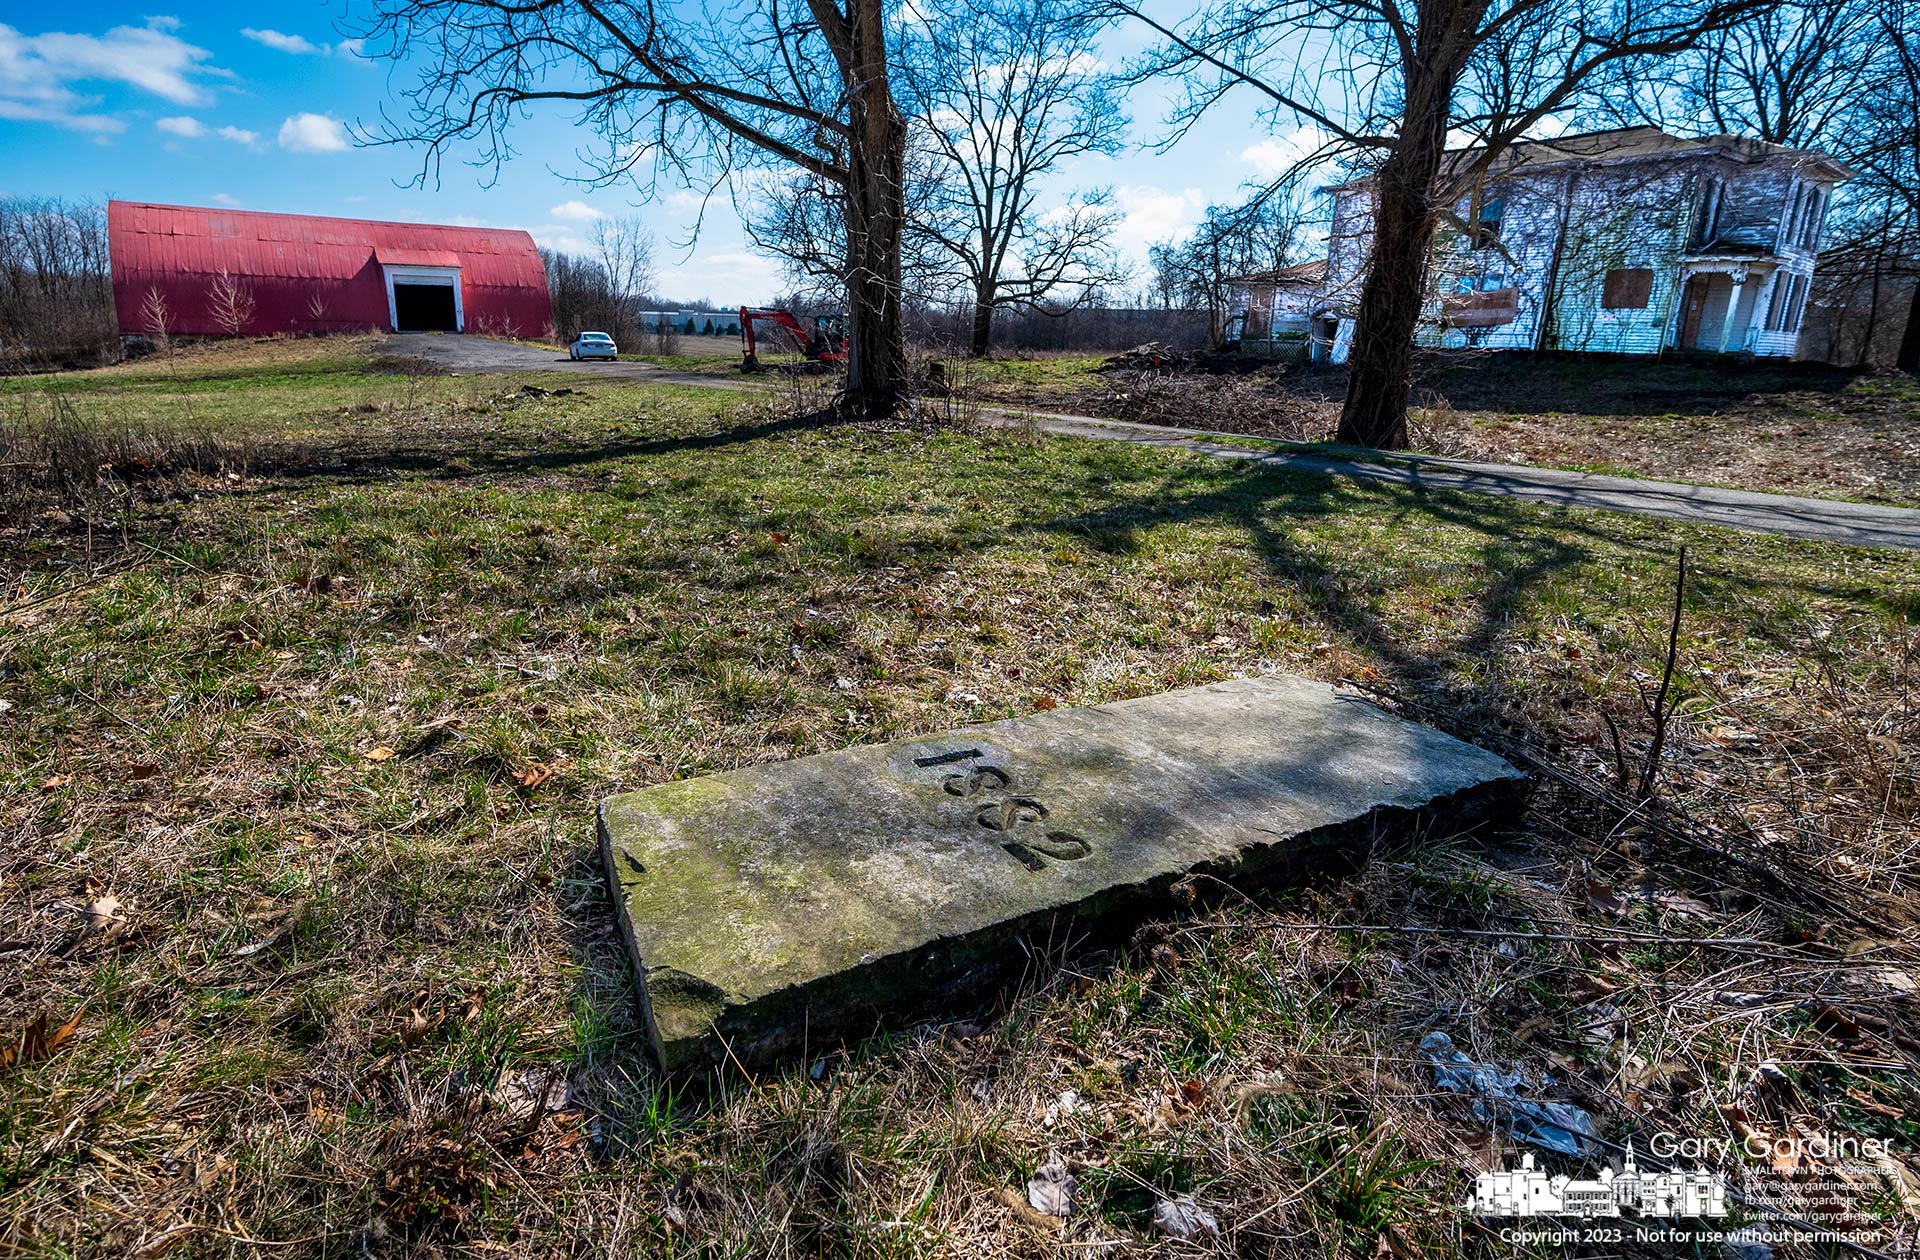 The 1882 marker at the Braun Farm sits in a temporary location removed from where it was in danger of damage by trucks and equipment used to demolish the house and barn. My Final Photo for March 4, 2023.